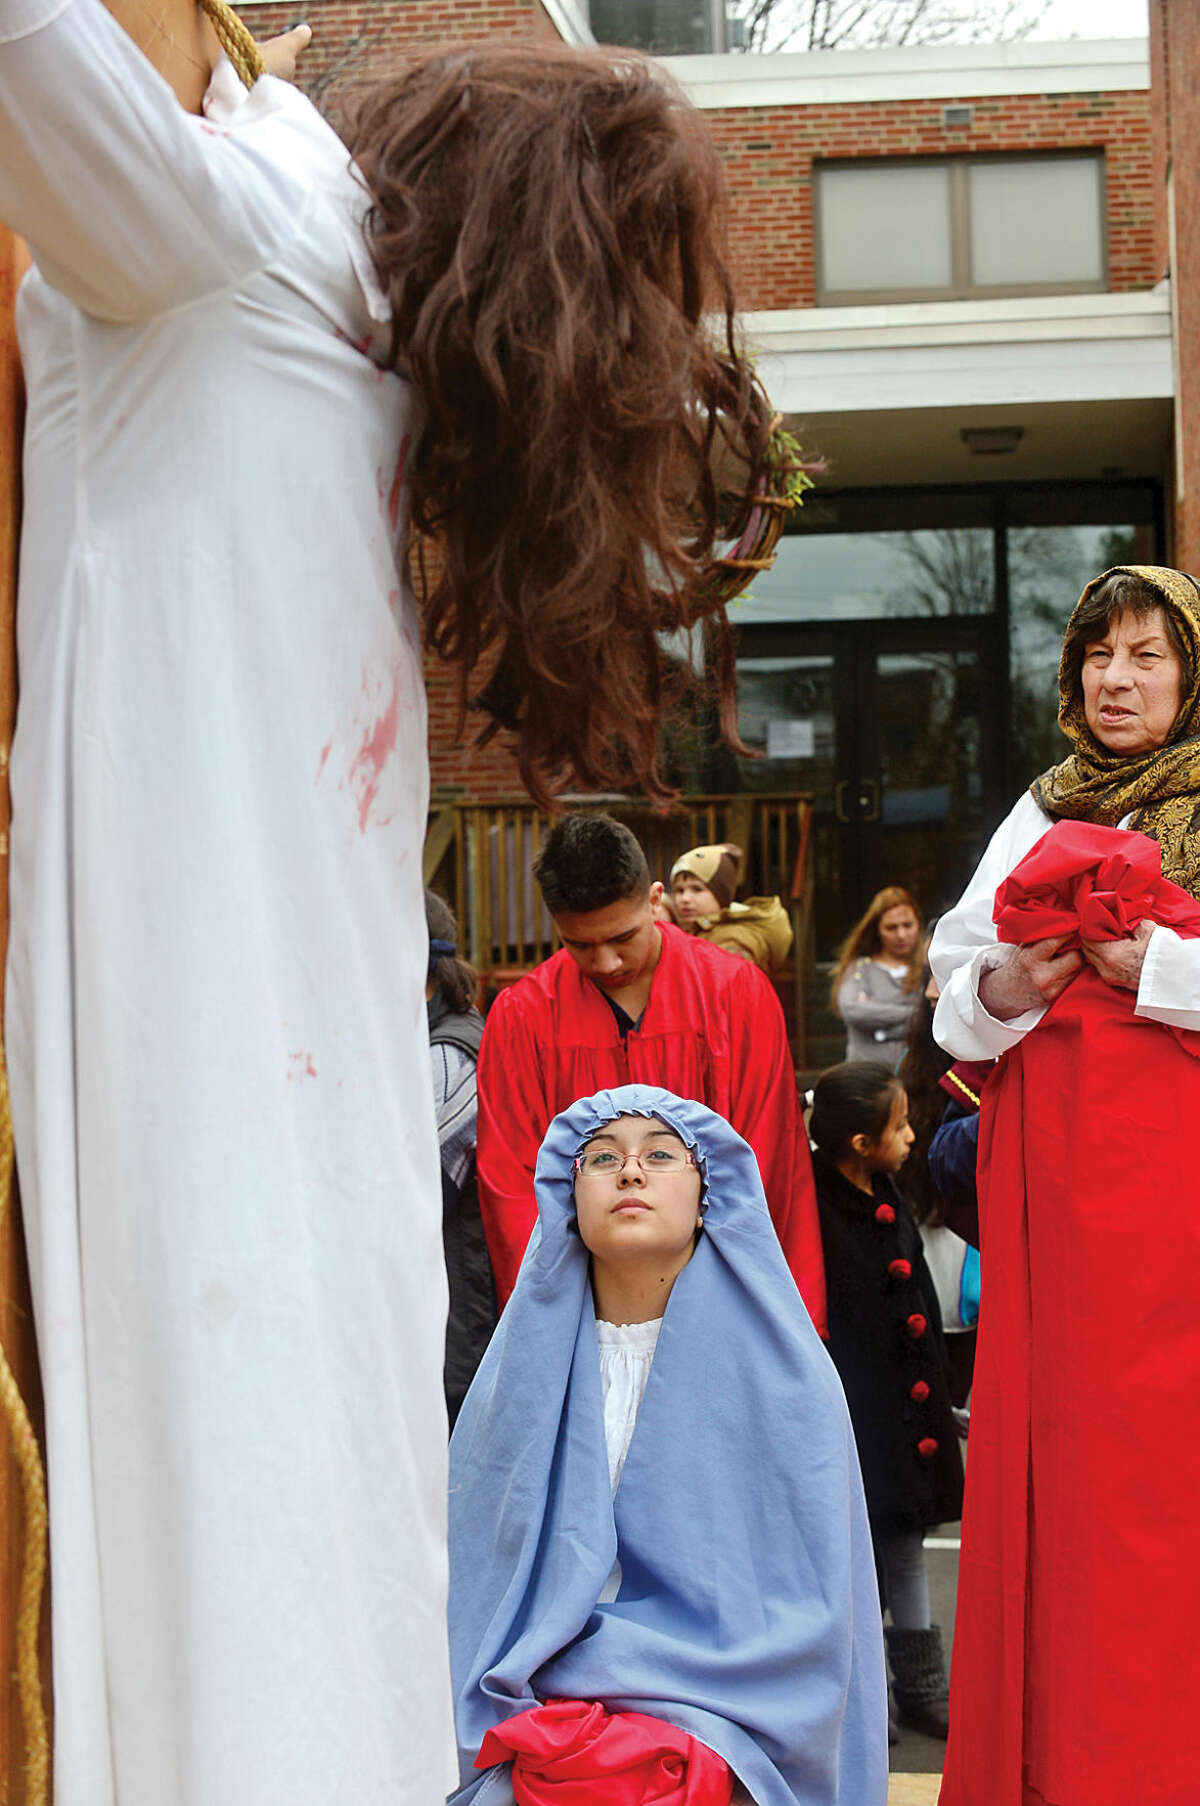 Hour photo / Erik Trautmann Alexandra Garcia, 15, portrays Mary, bottom left, as nearly 100 parishioners of St. Joseph Church observe the Living Stations of the Cross at the church in South Norwalk on Good Friday.